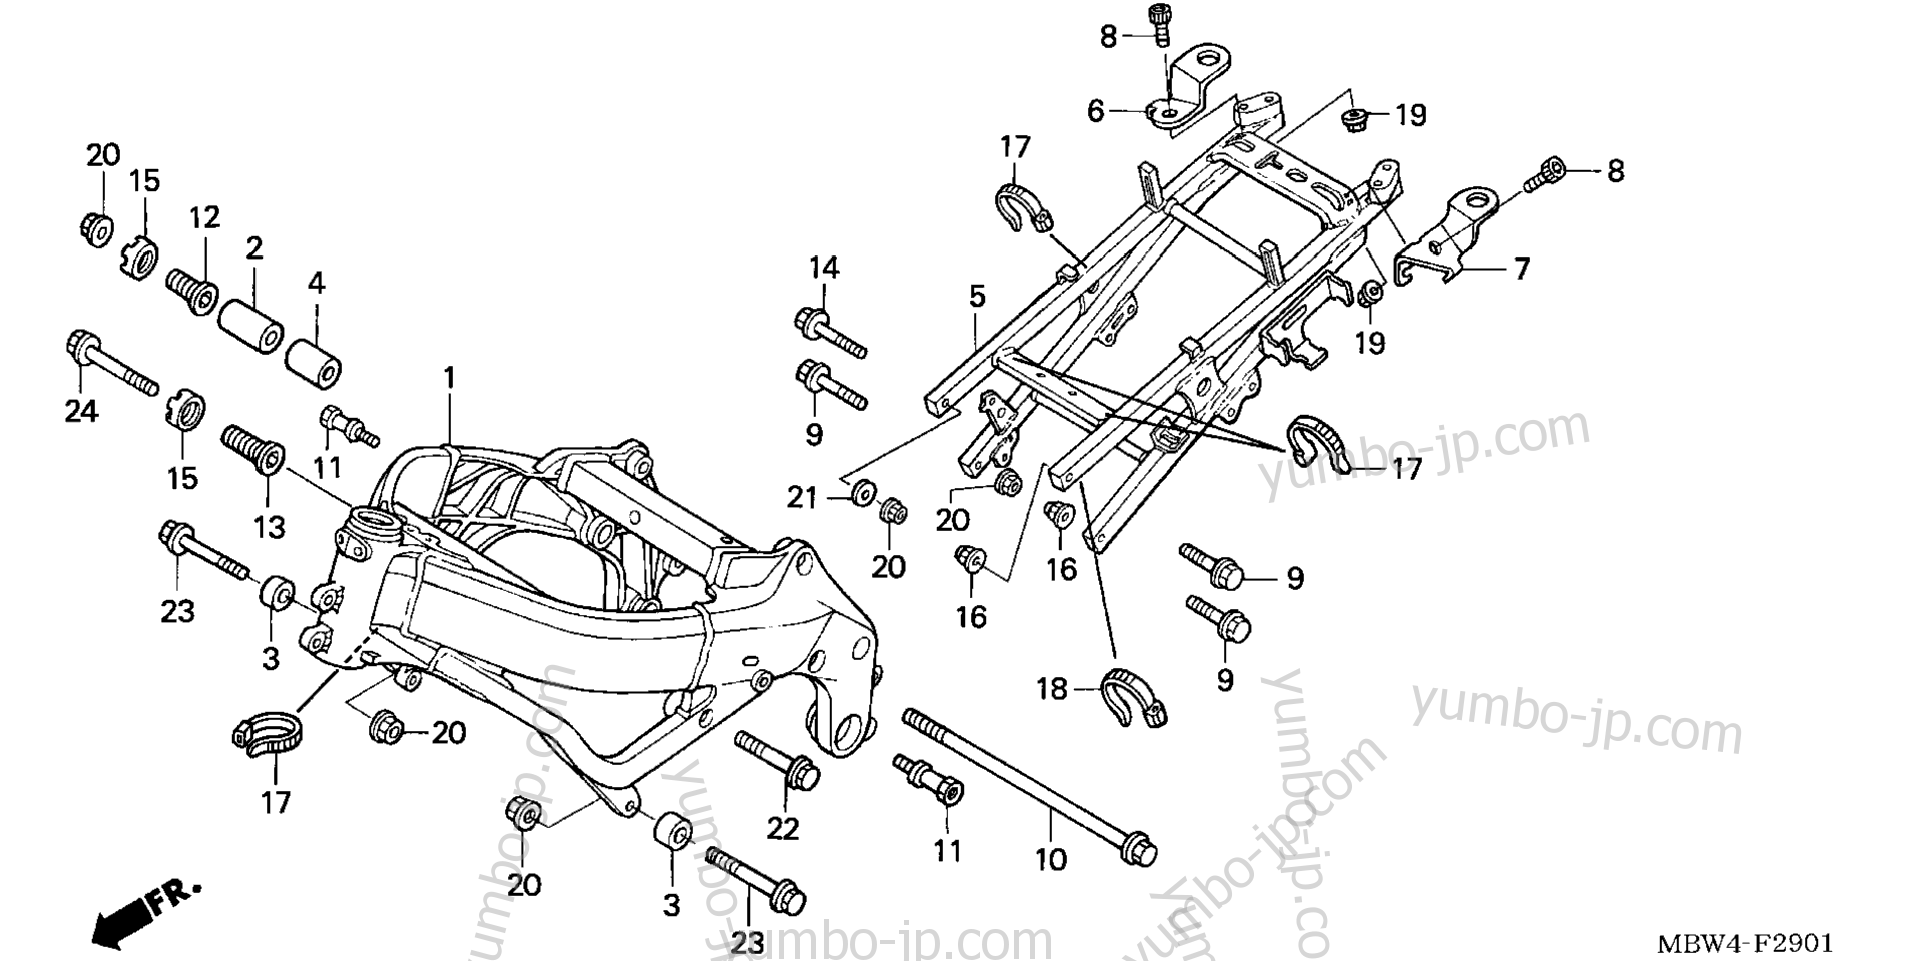 FRAME ('04-'06) for motorcycles HONDA CBR600F4 A 2004 year